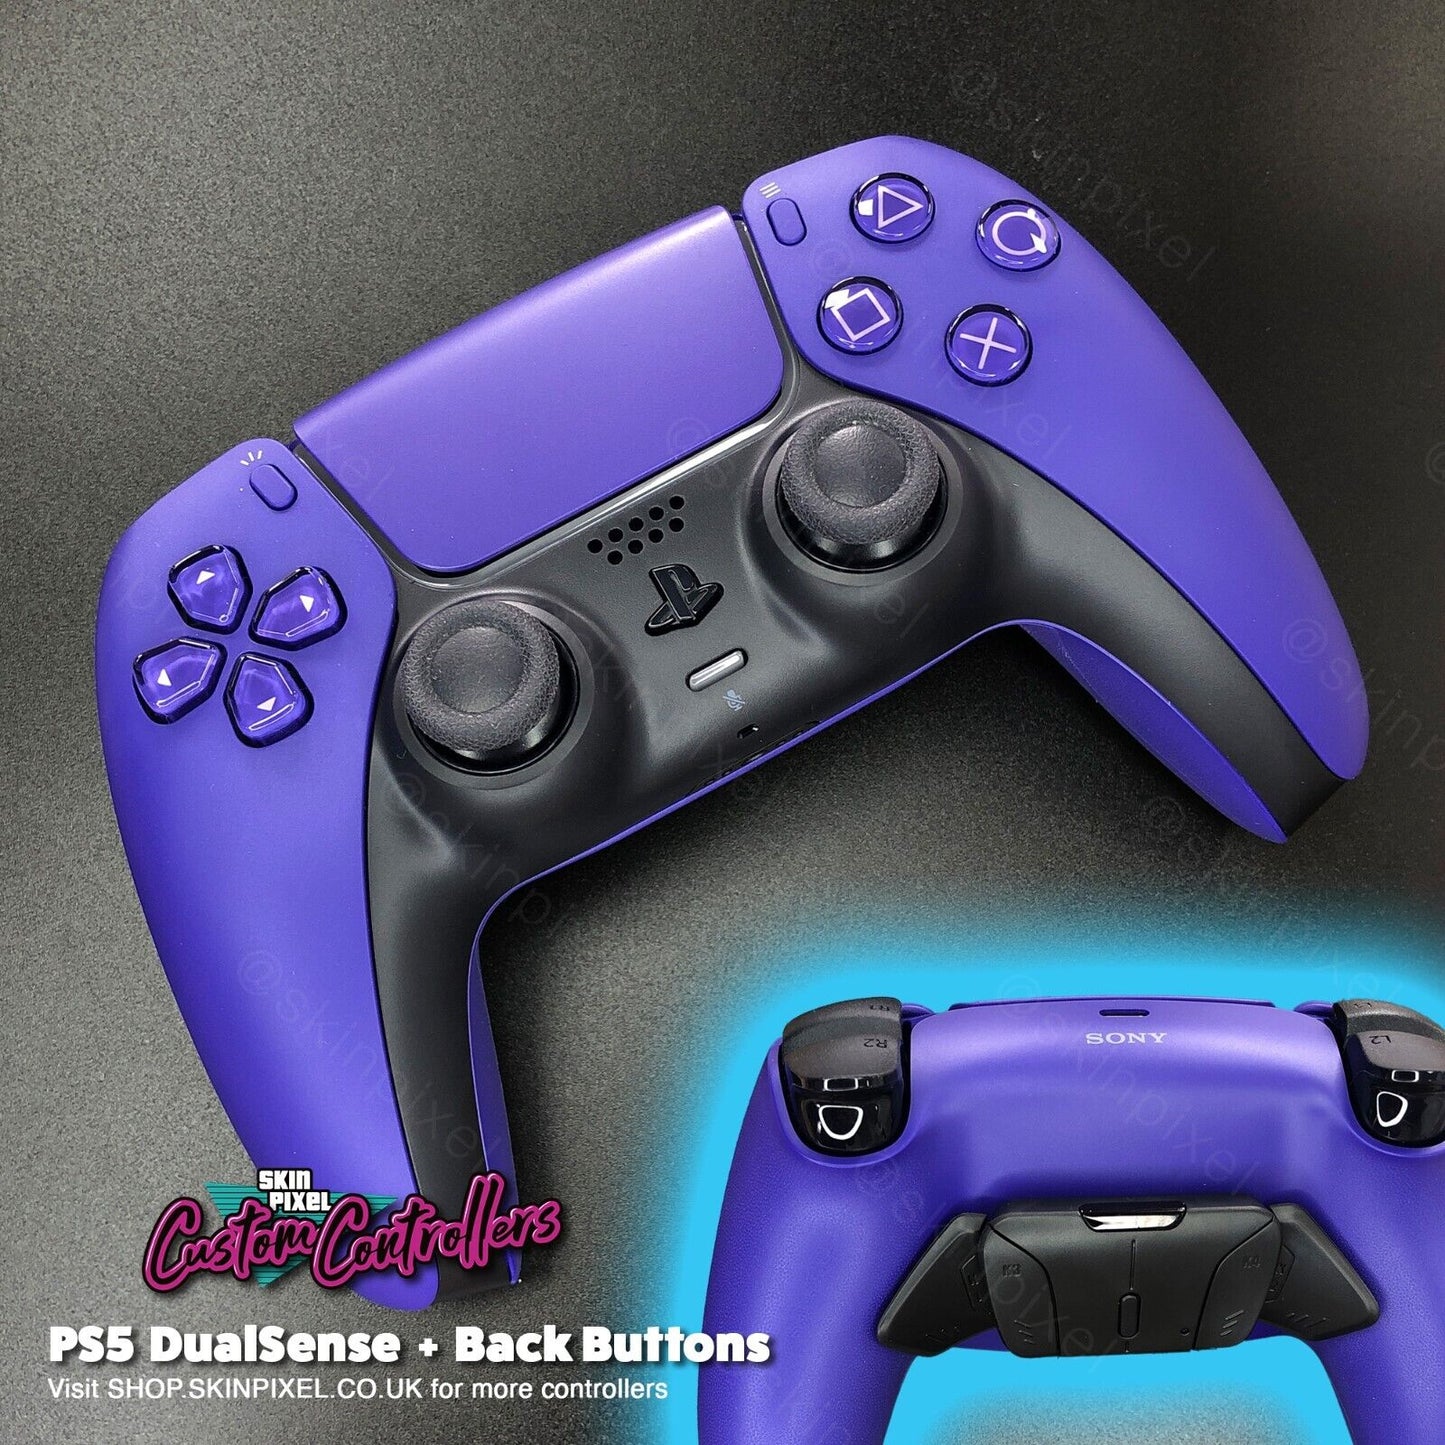 Galactic Purple PlayStation 5 DualSense with Back Buttons / Original Galactic Purple Back